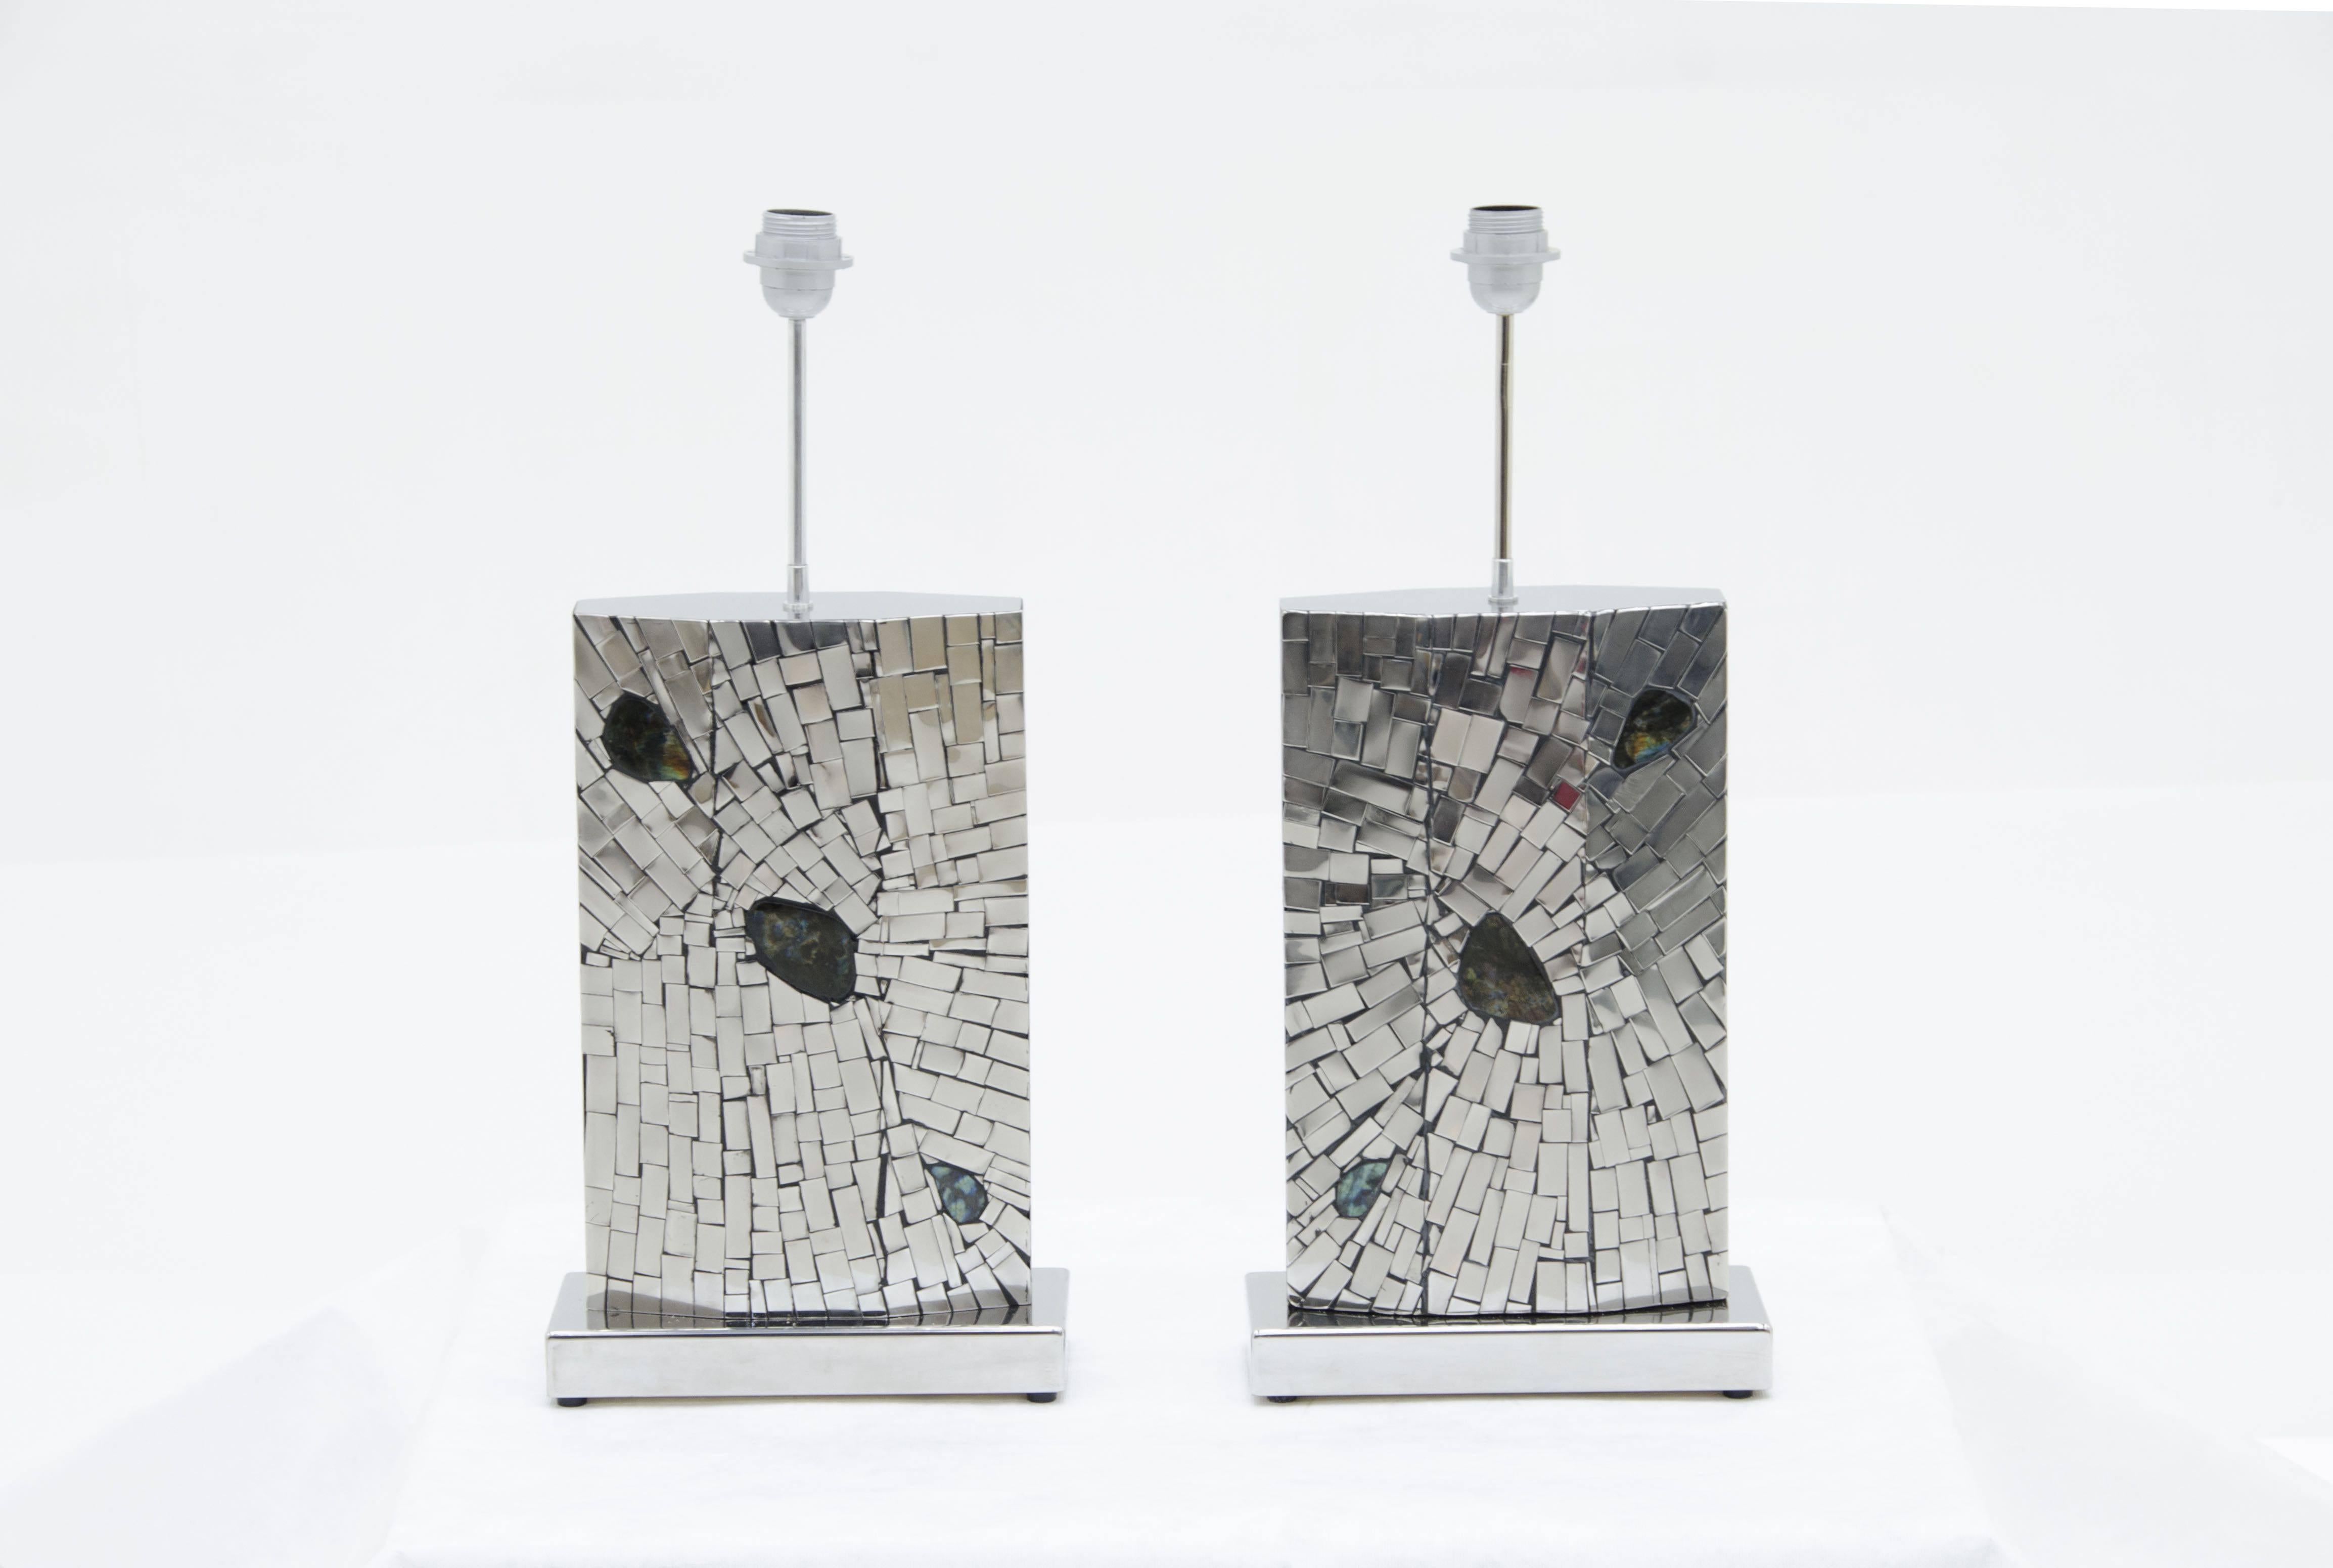 Pair of lamps mosaic stainless steel inlaid Labradorite by Stan Usel.
These pieces are made exclusively and distributed in USA for Saint Germain antiques. Exceptional craftsmanship. All pieces can be custom made to order. Signed by the